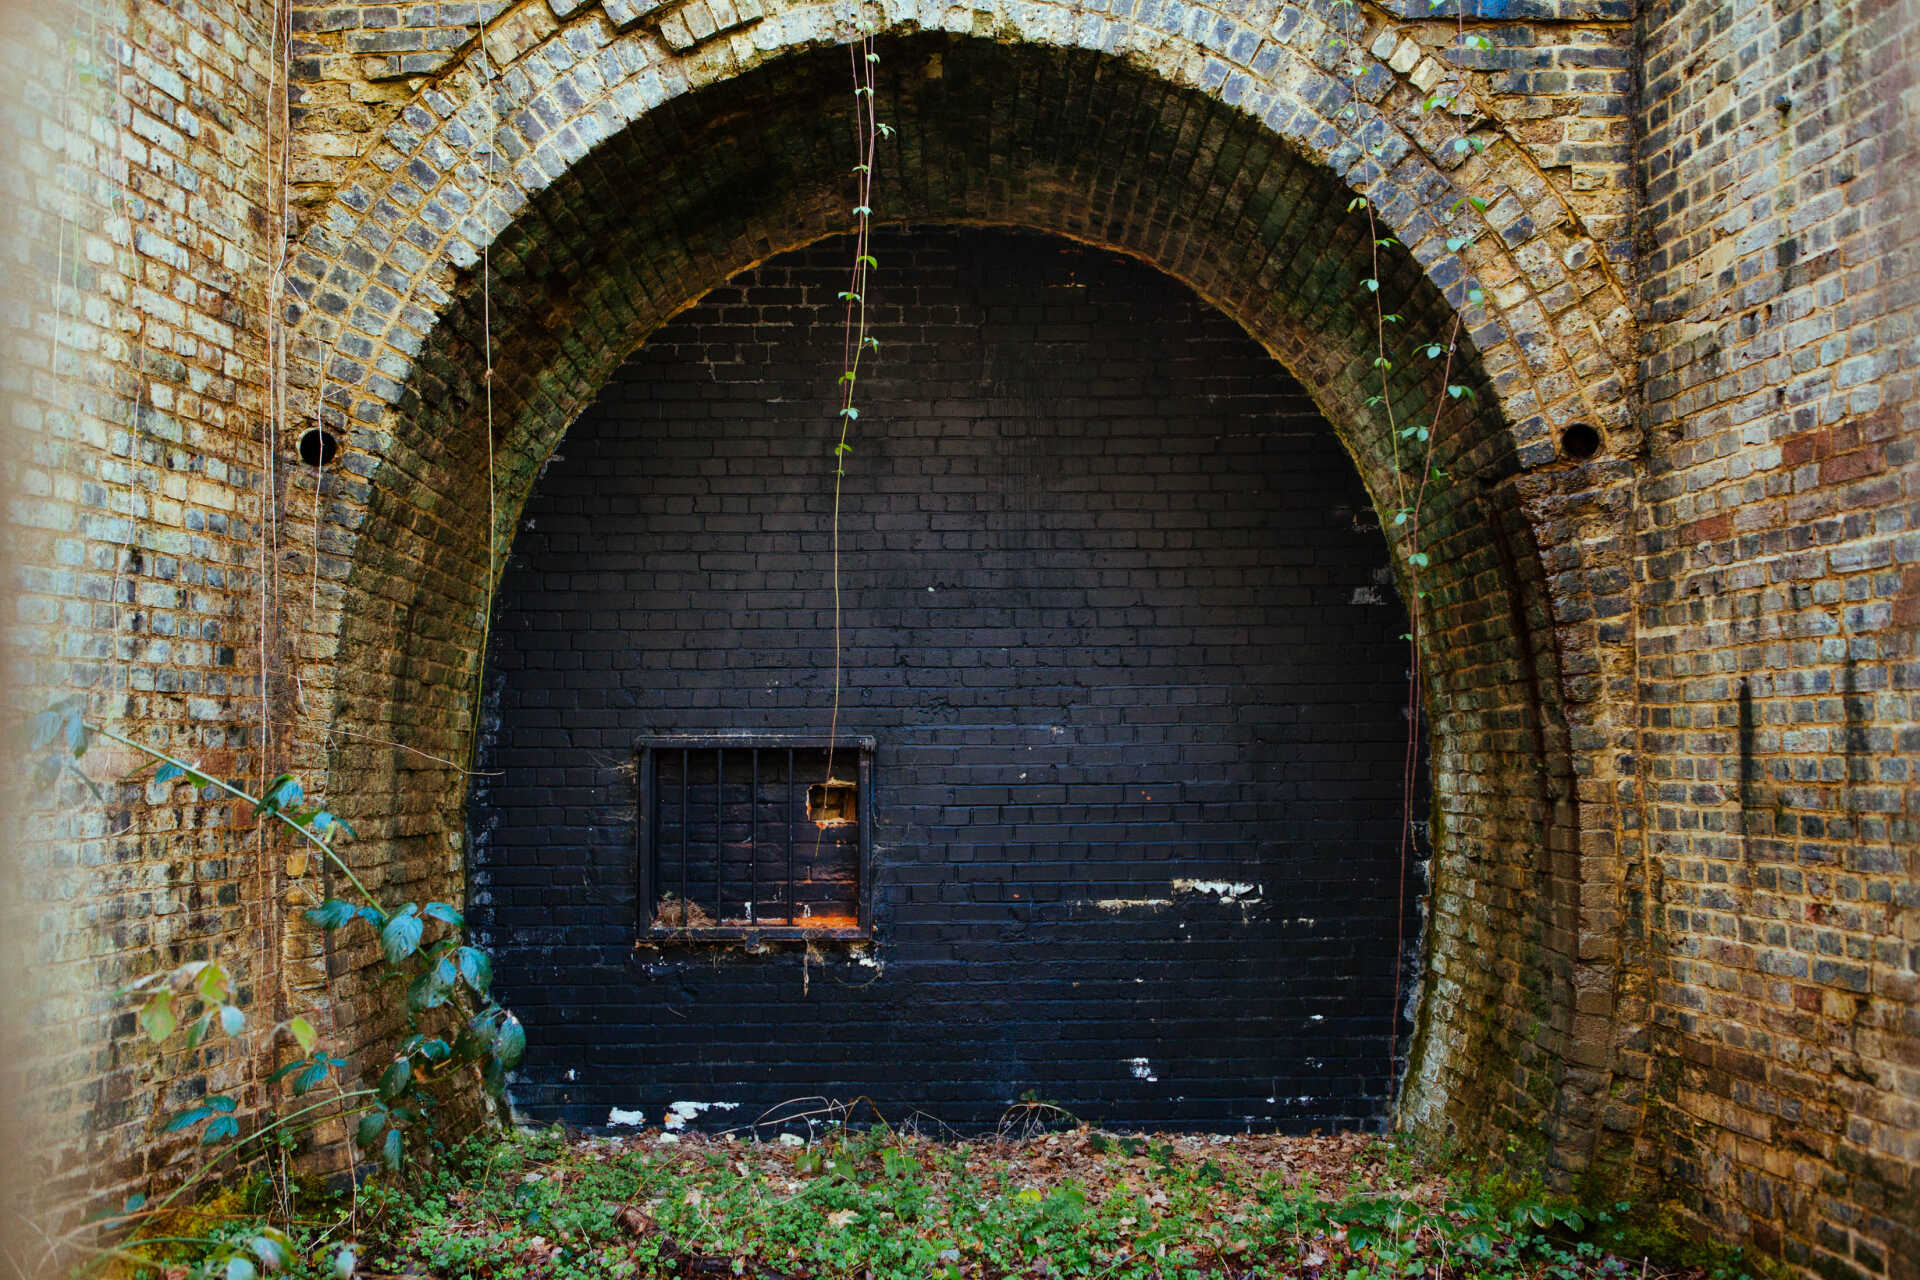 A blocked off tunnel and brick walls, with wildlife growing around.